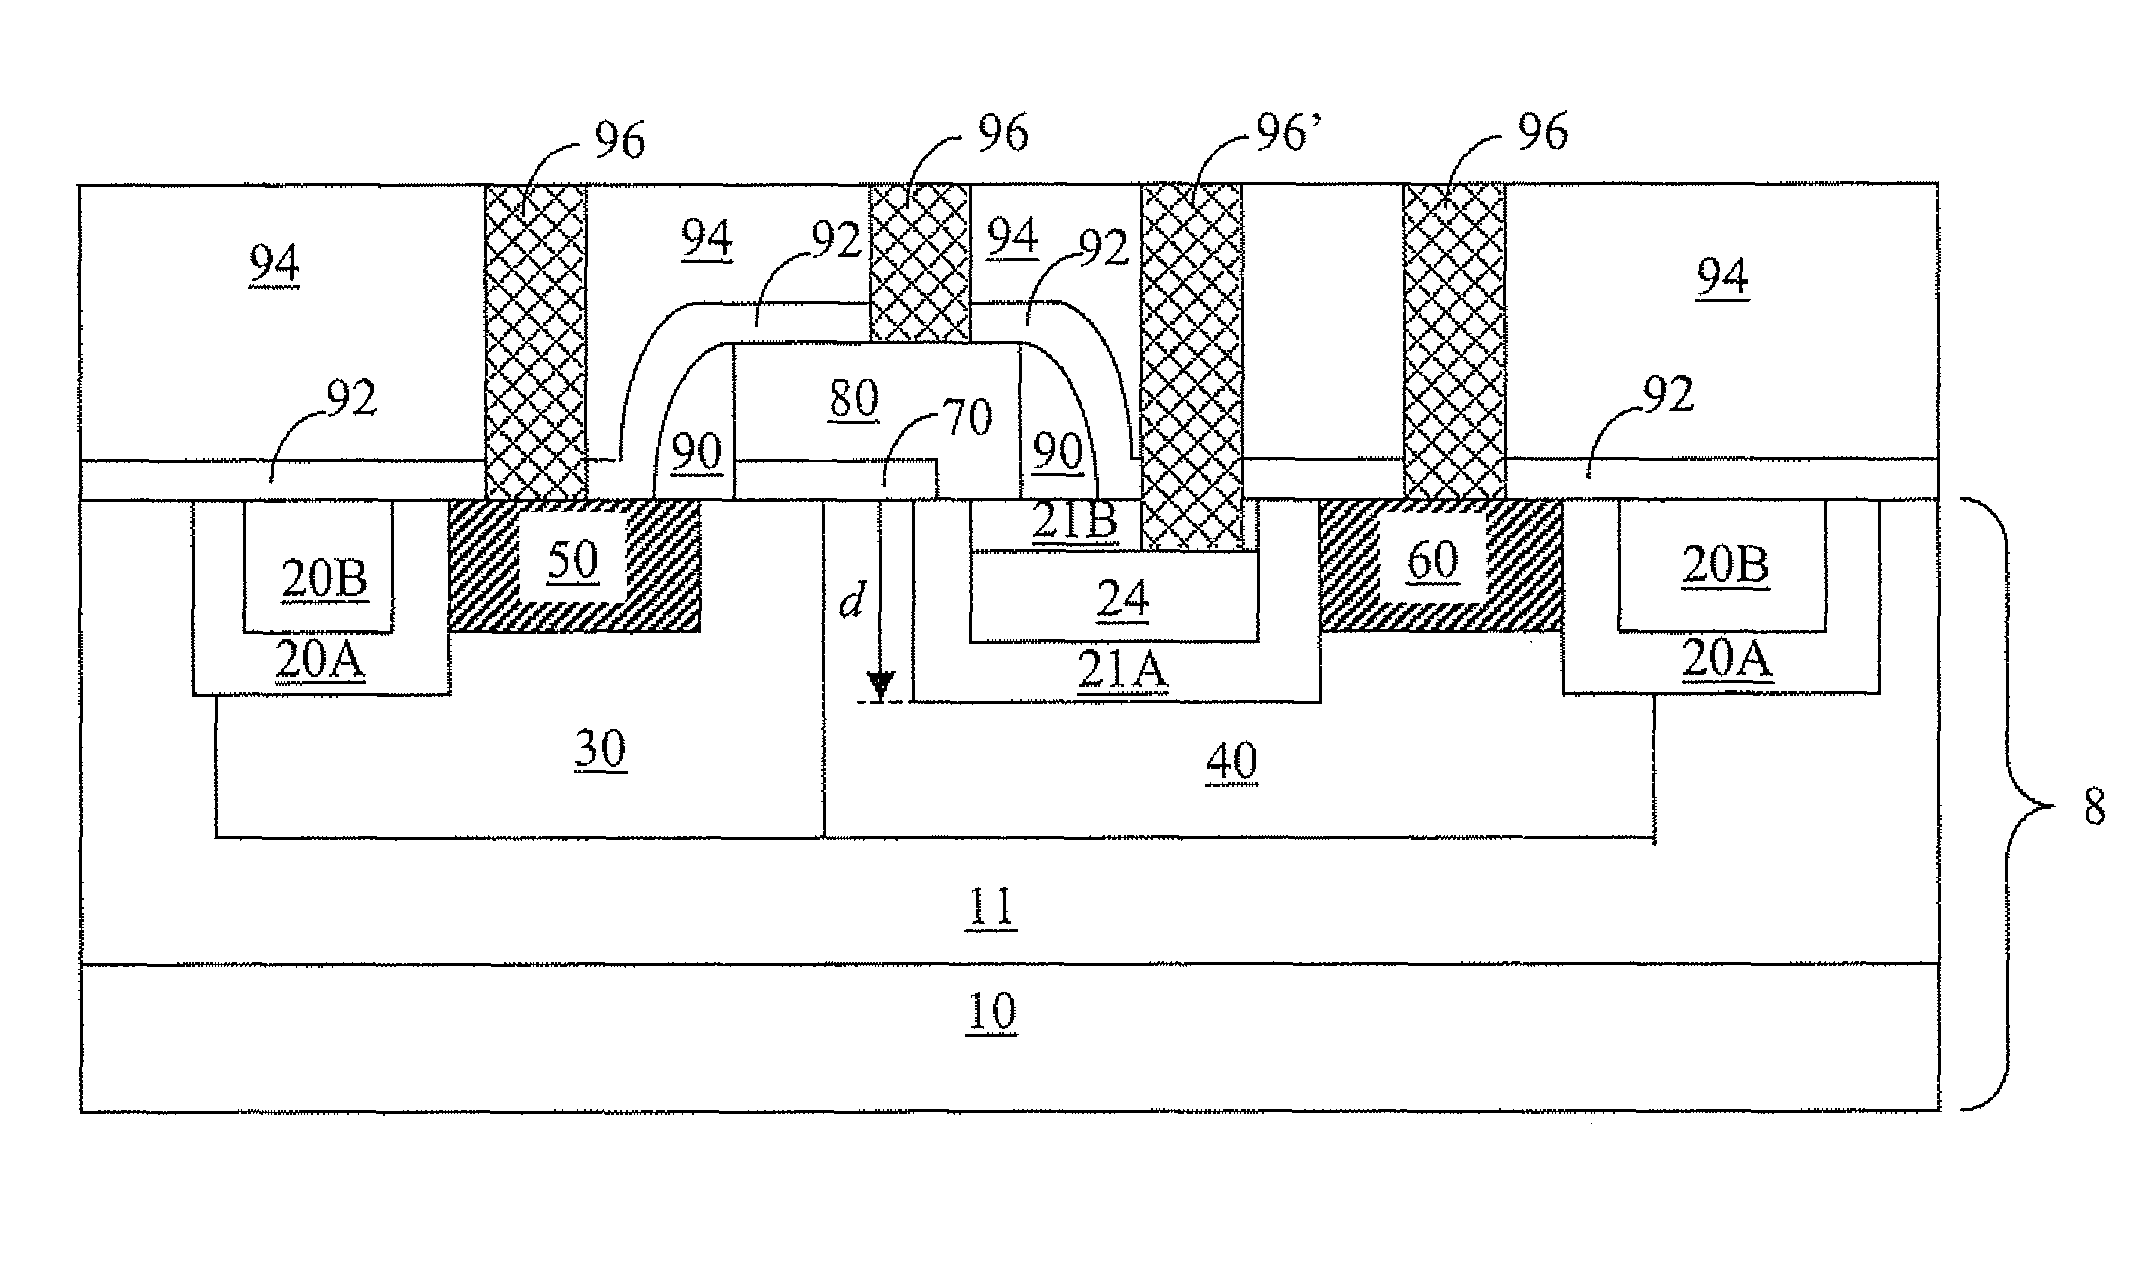 Lateral diffusion field effect transistor with a trench field plate